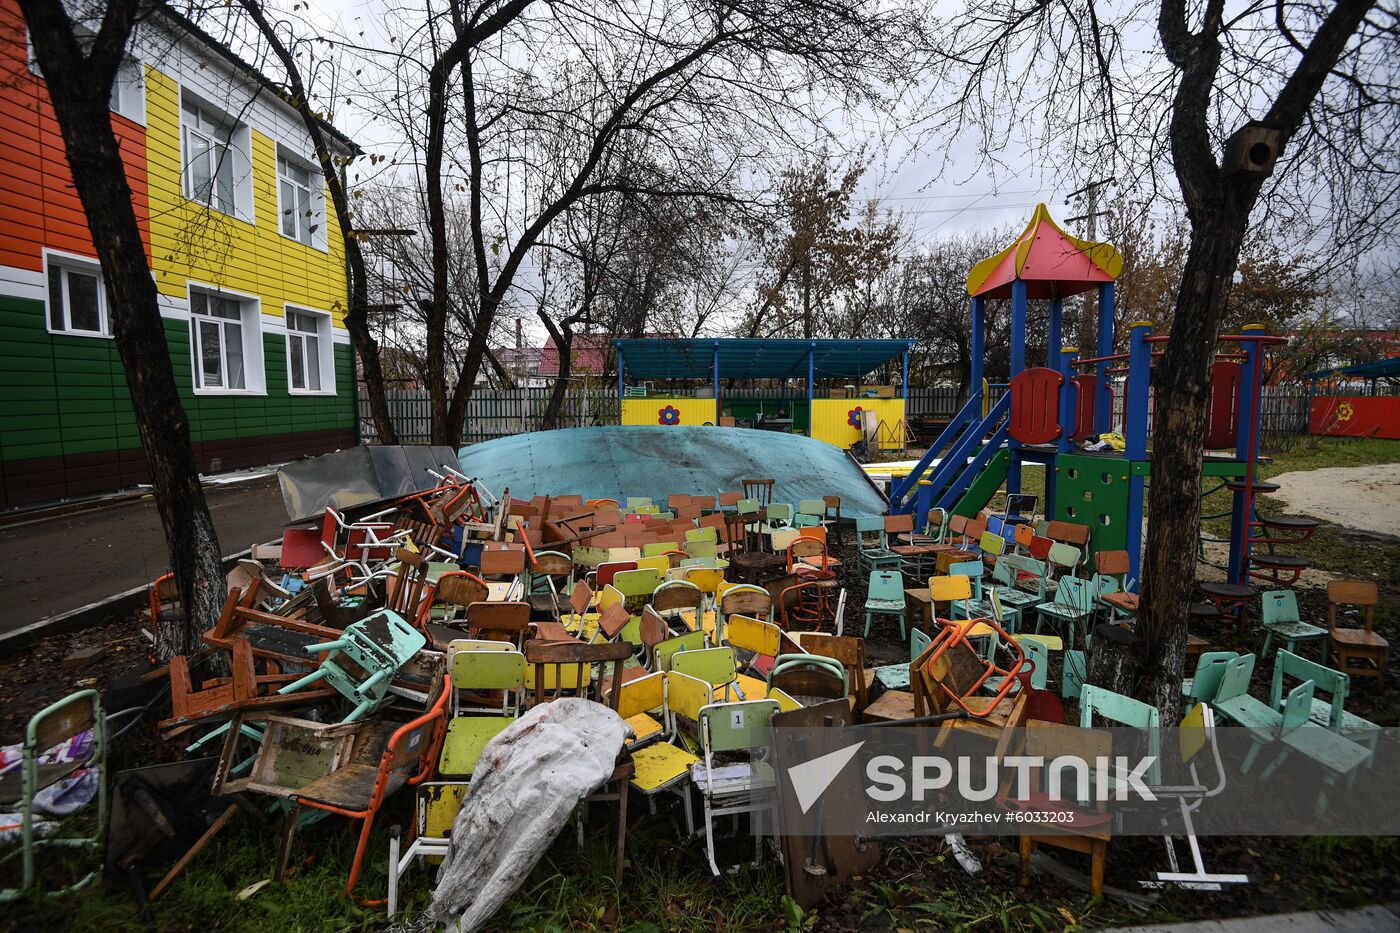 Russia Floods Aftermath